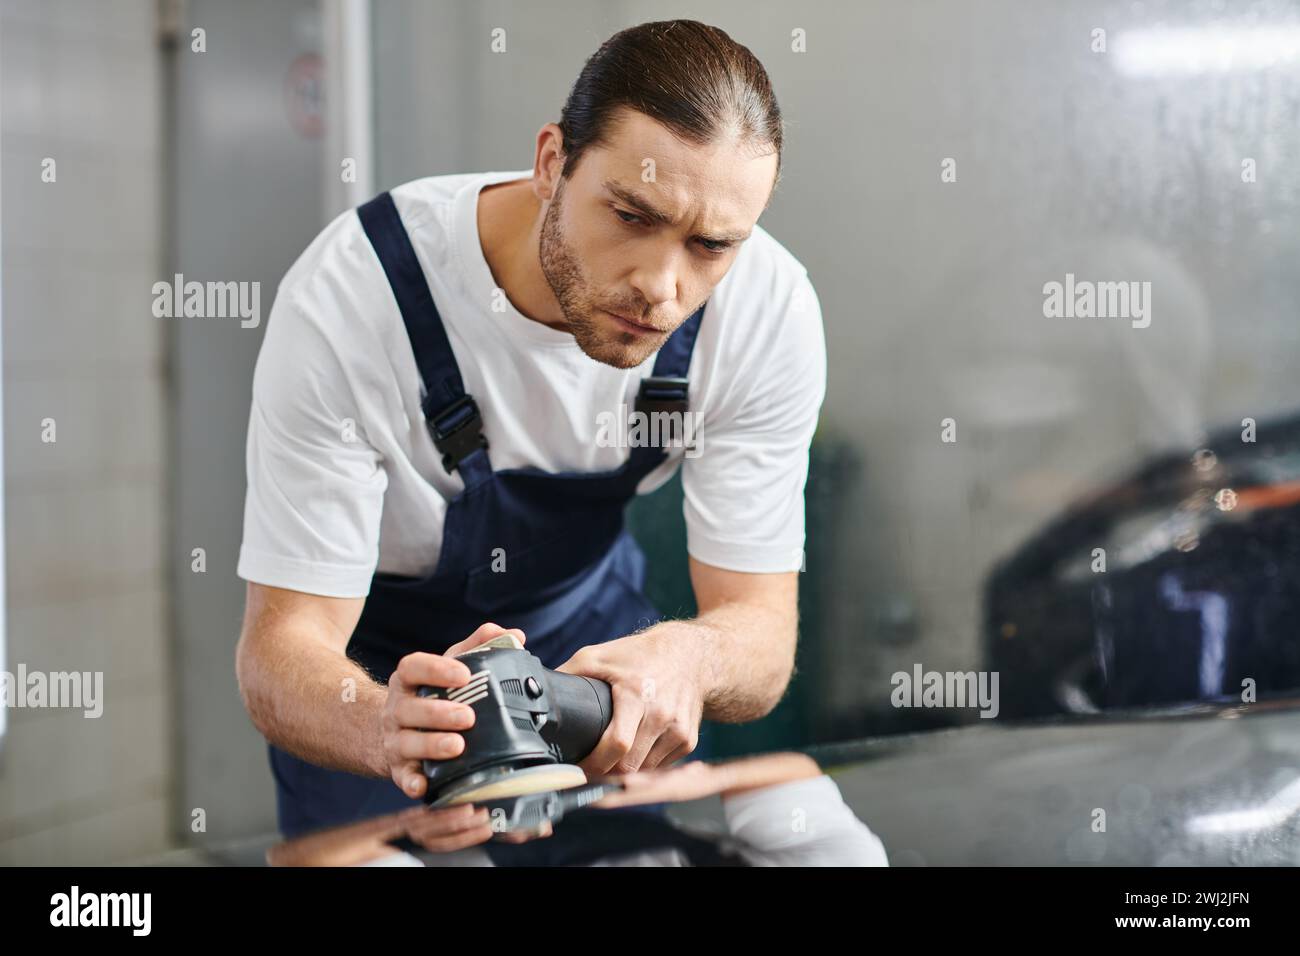 attractive devoted serviceman in uniform with collected hair using polishing machine carefully Stock Photo